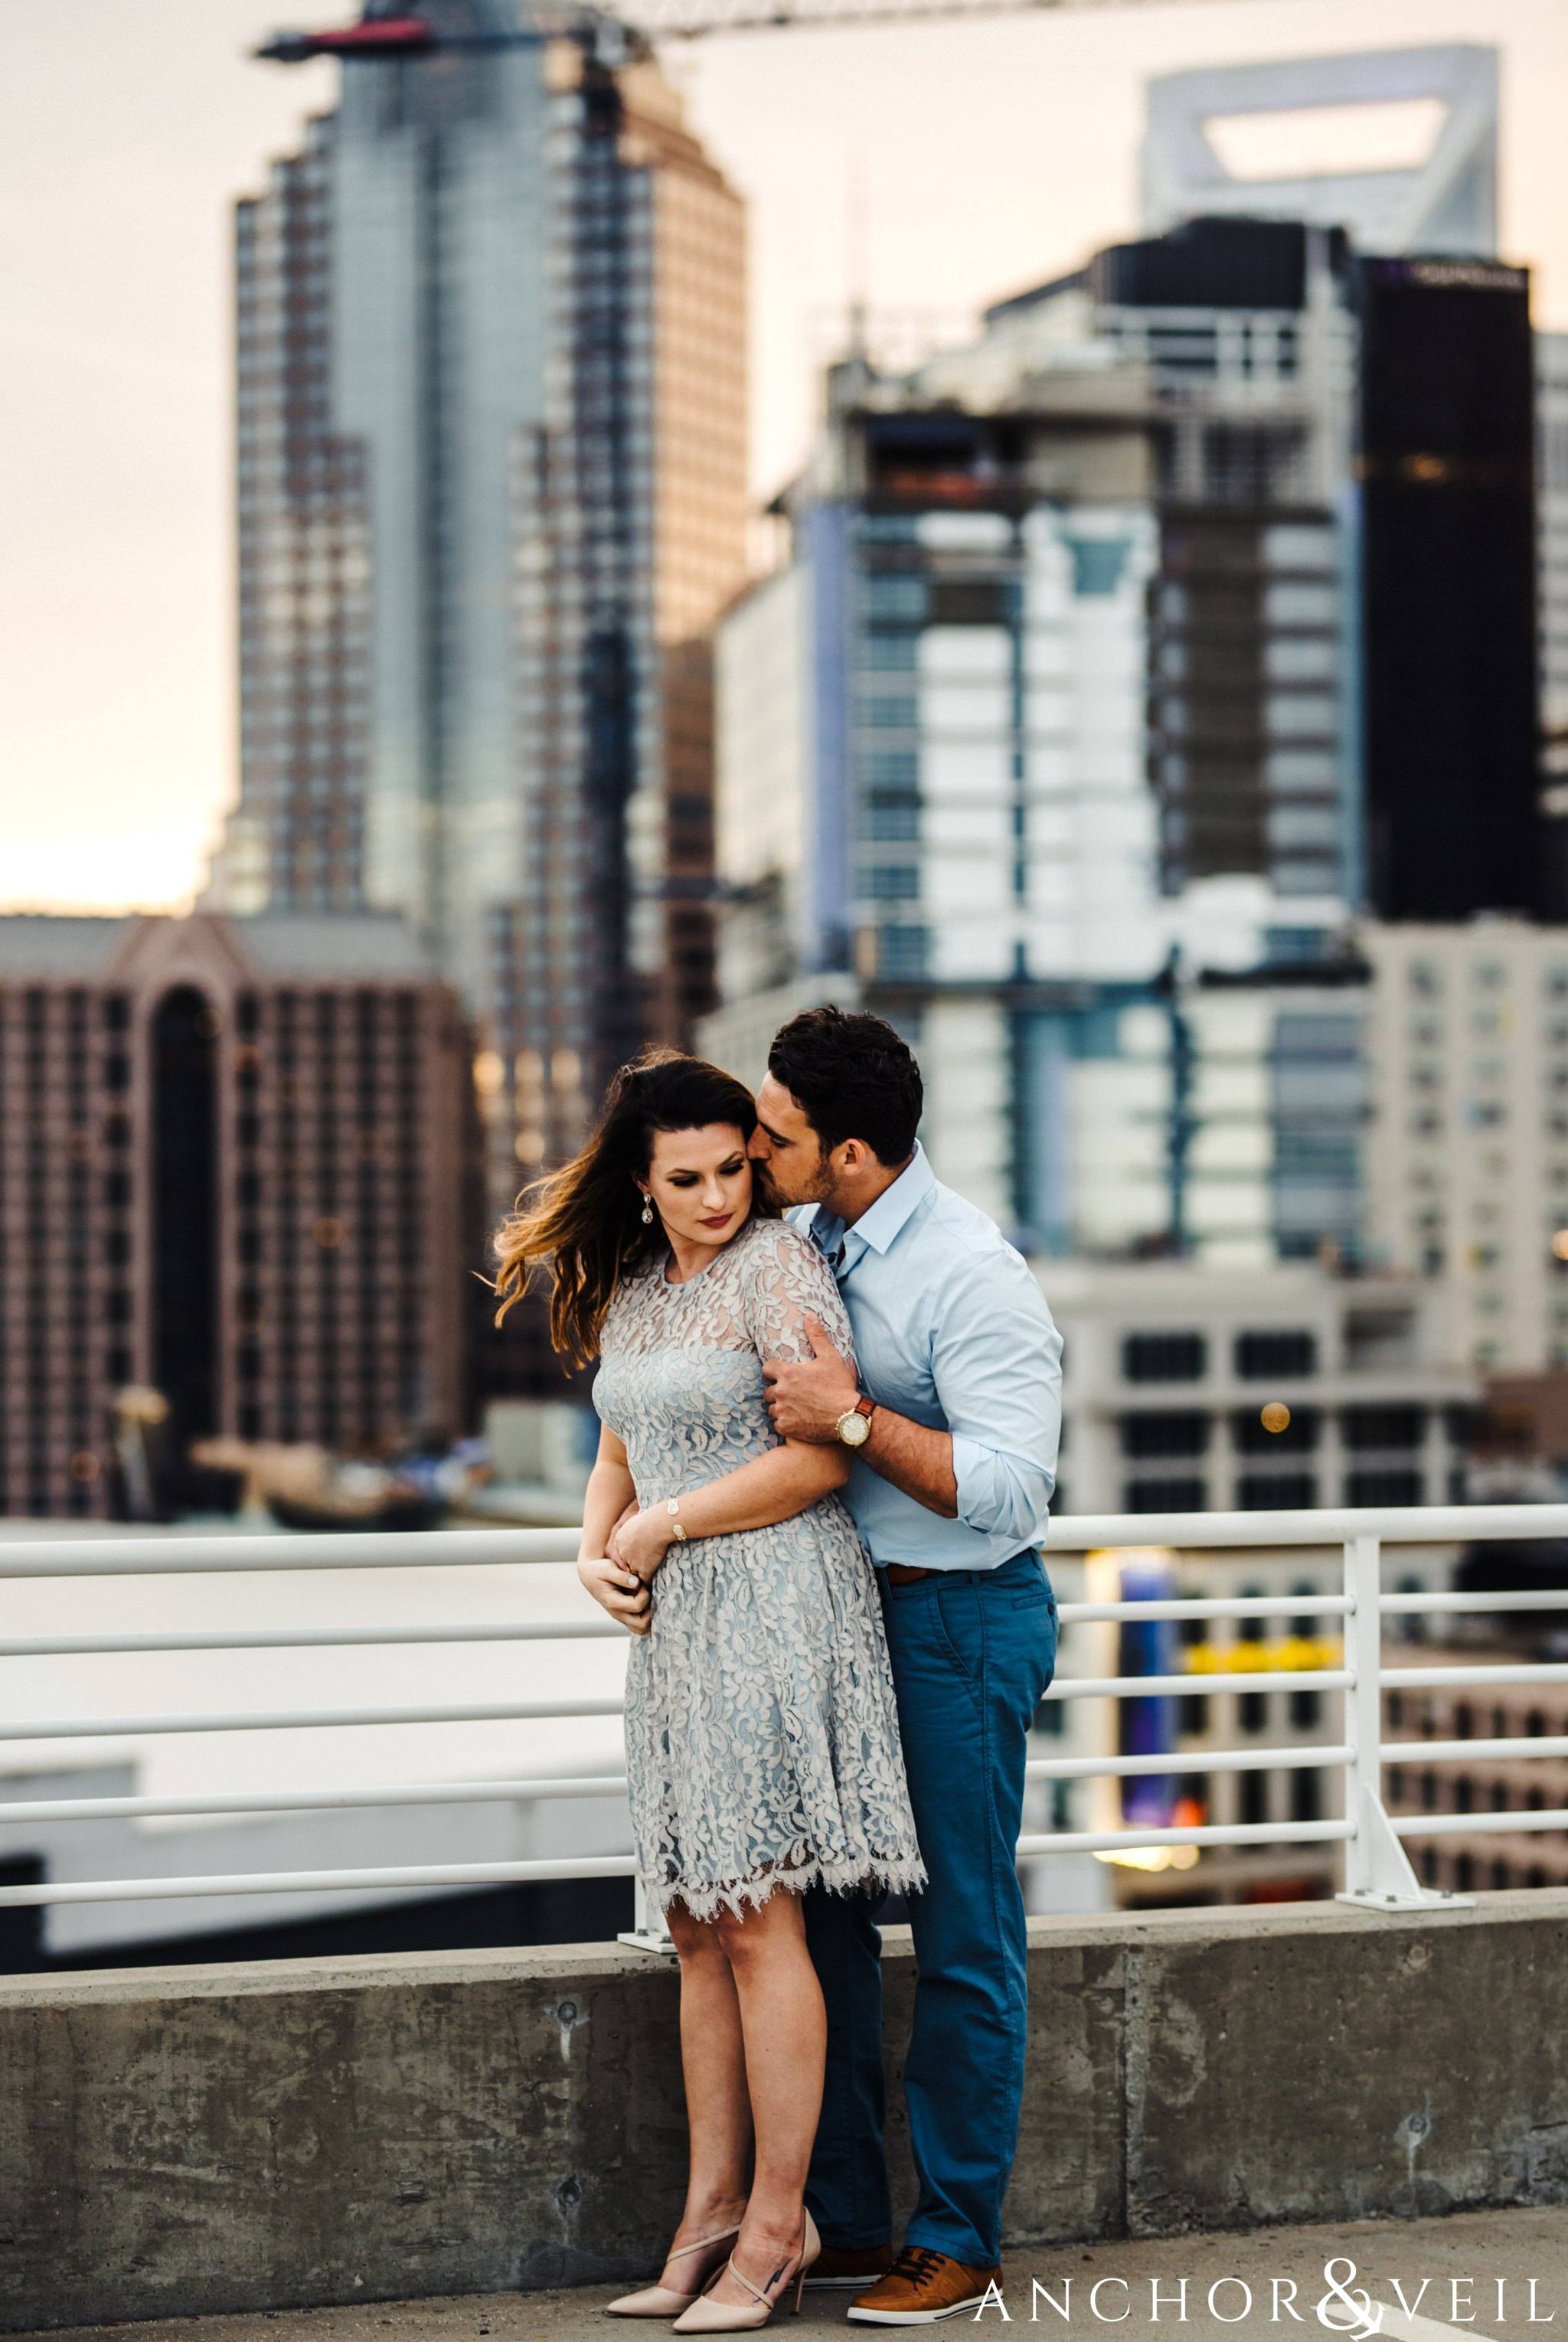 Charlotte uptown skyline during their Uptown Charlotte NC Engagement Session